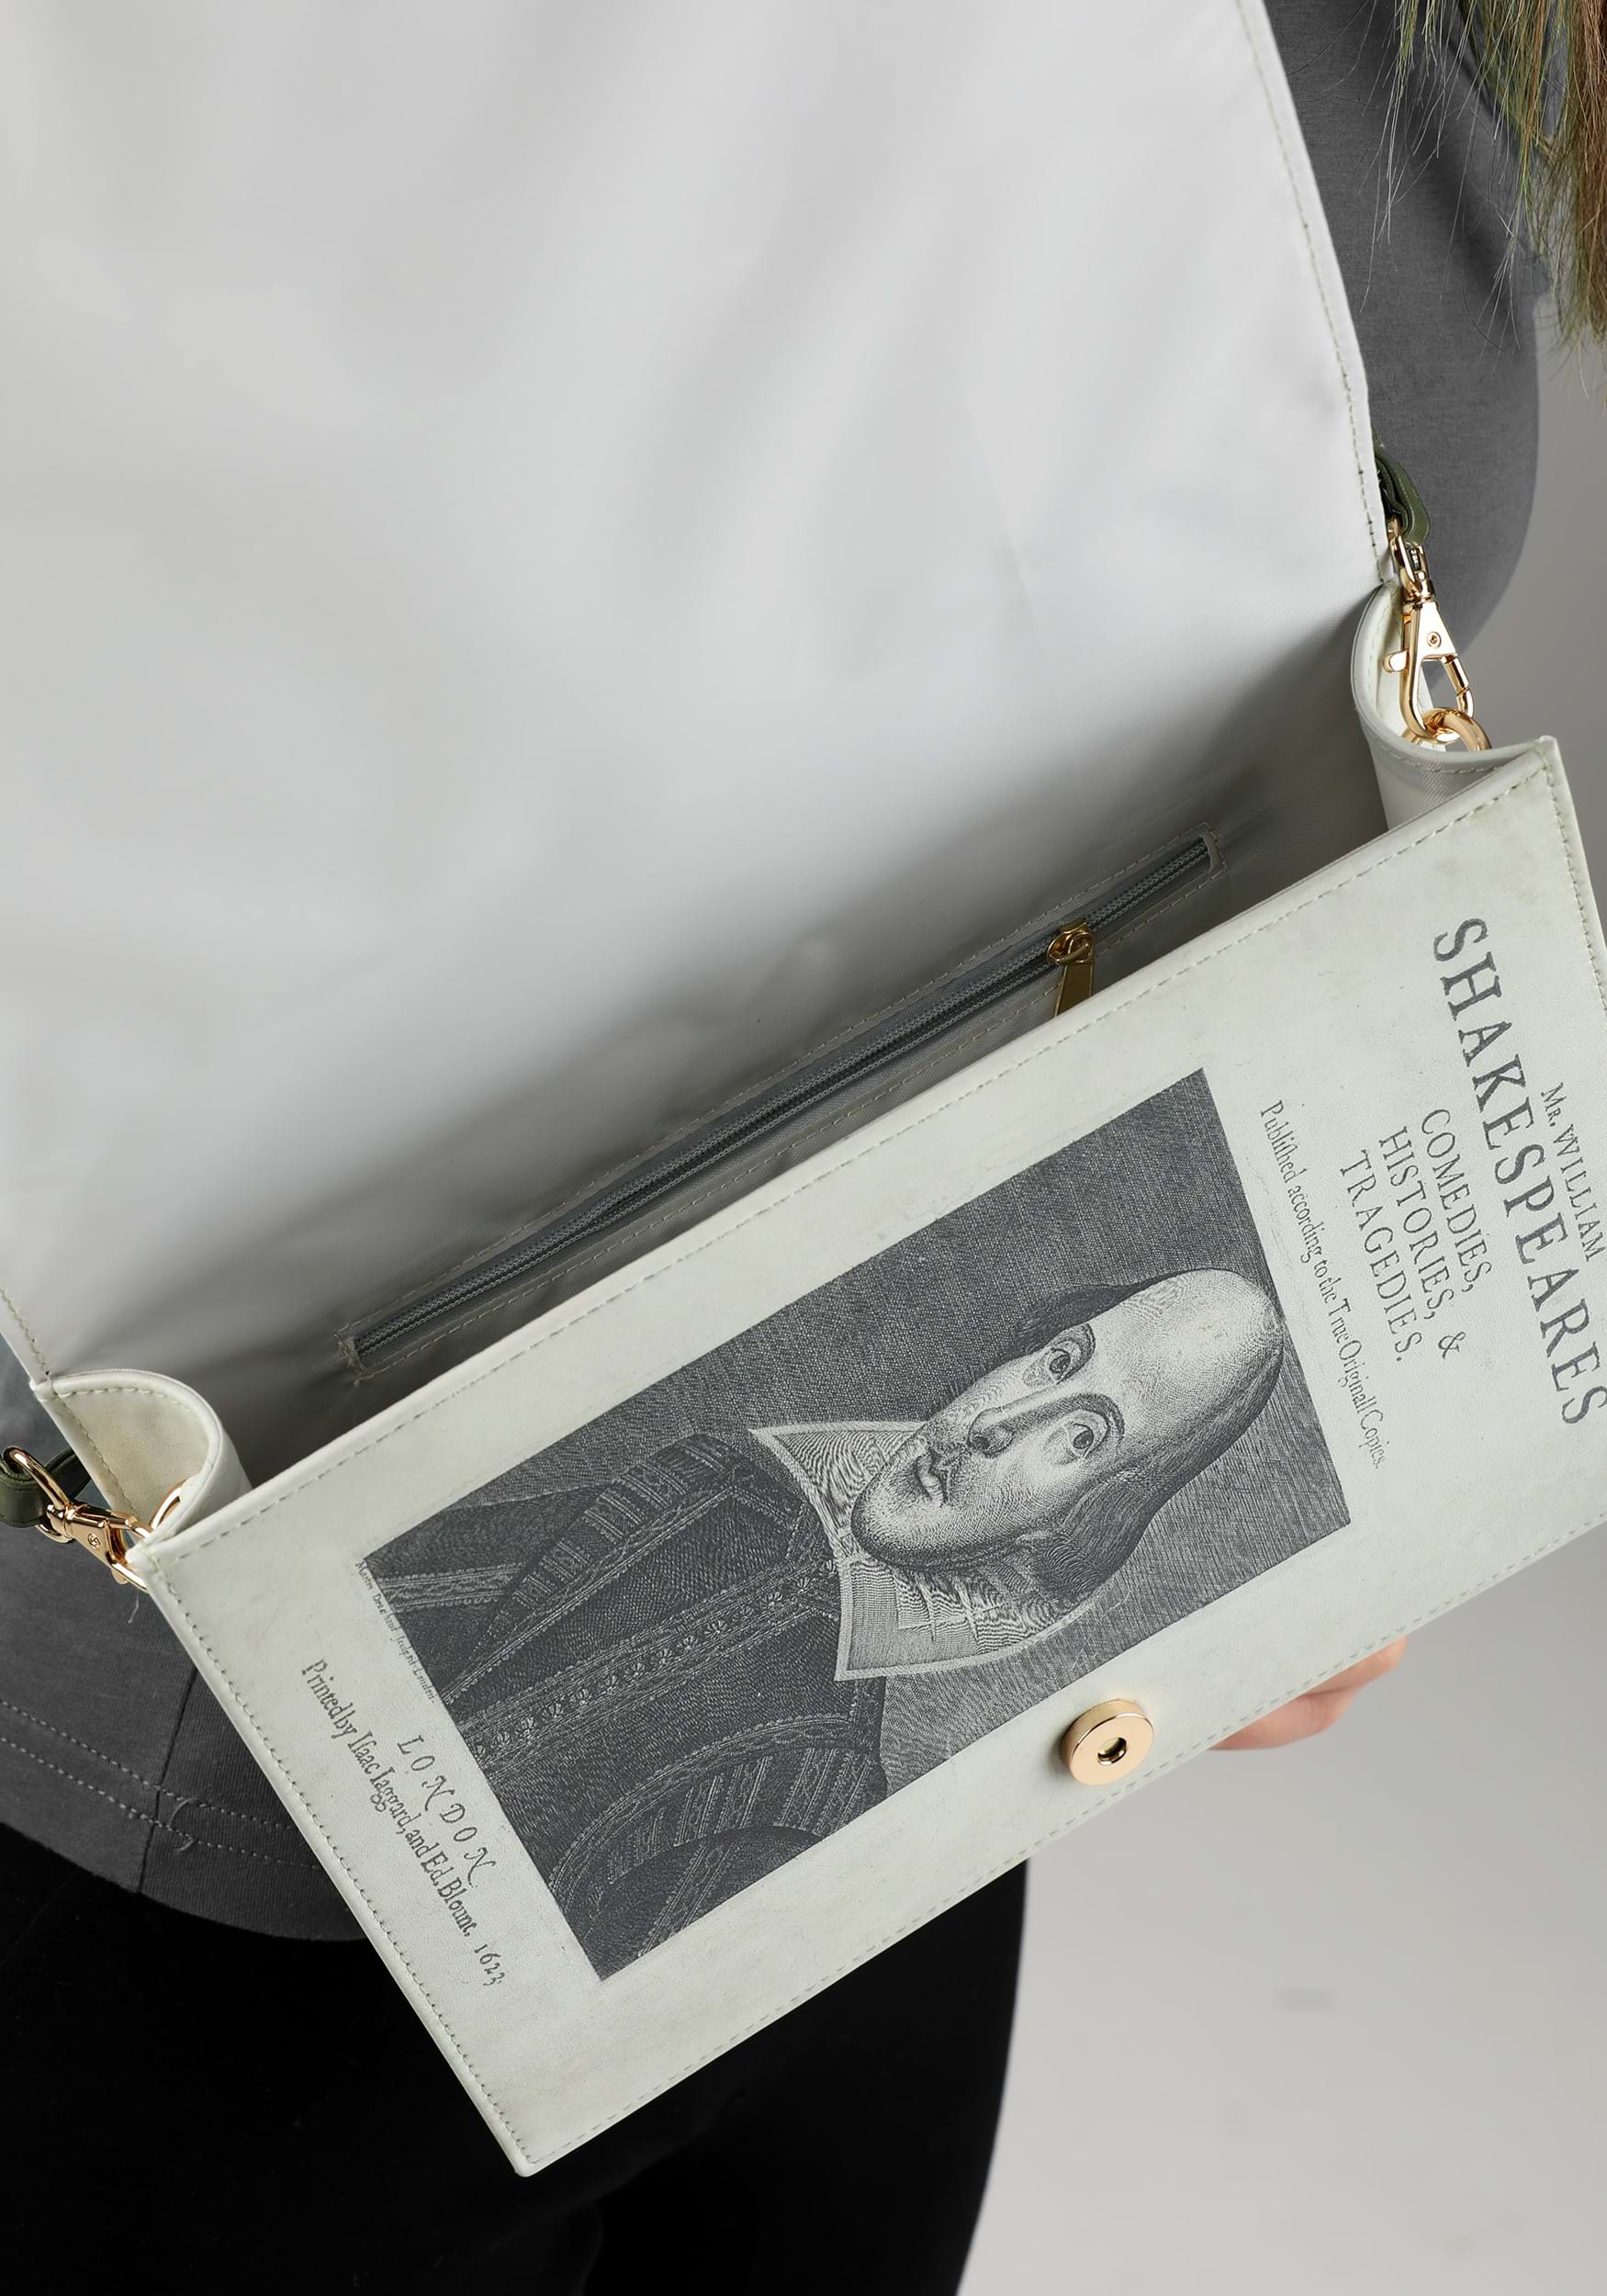 Shakespeare Book Fancy Dress Costume Bag , Historical Accessories